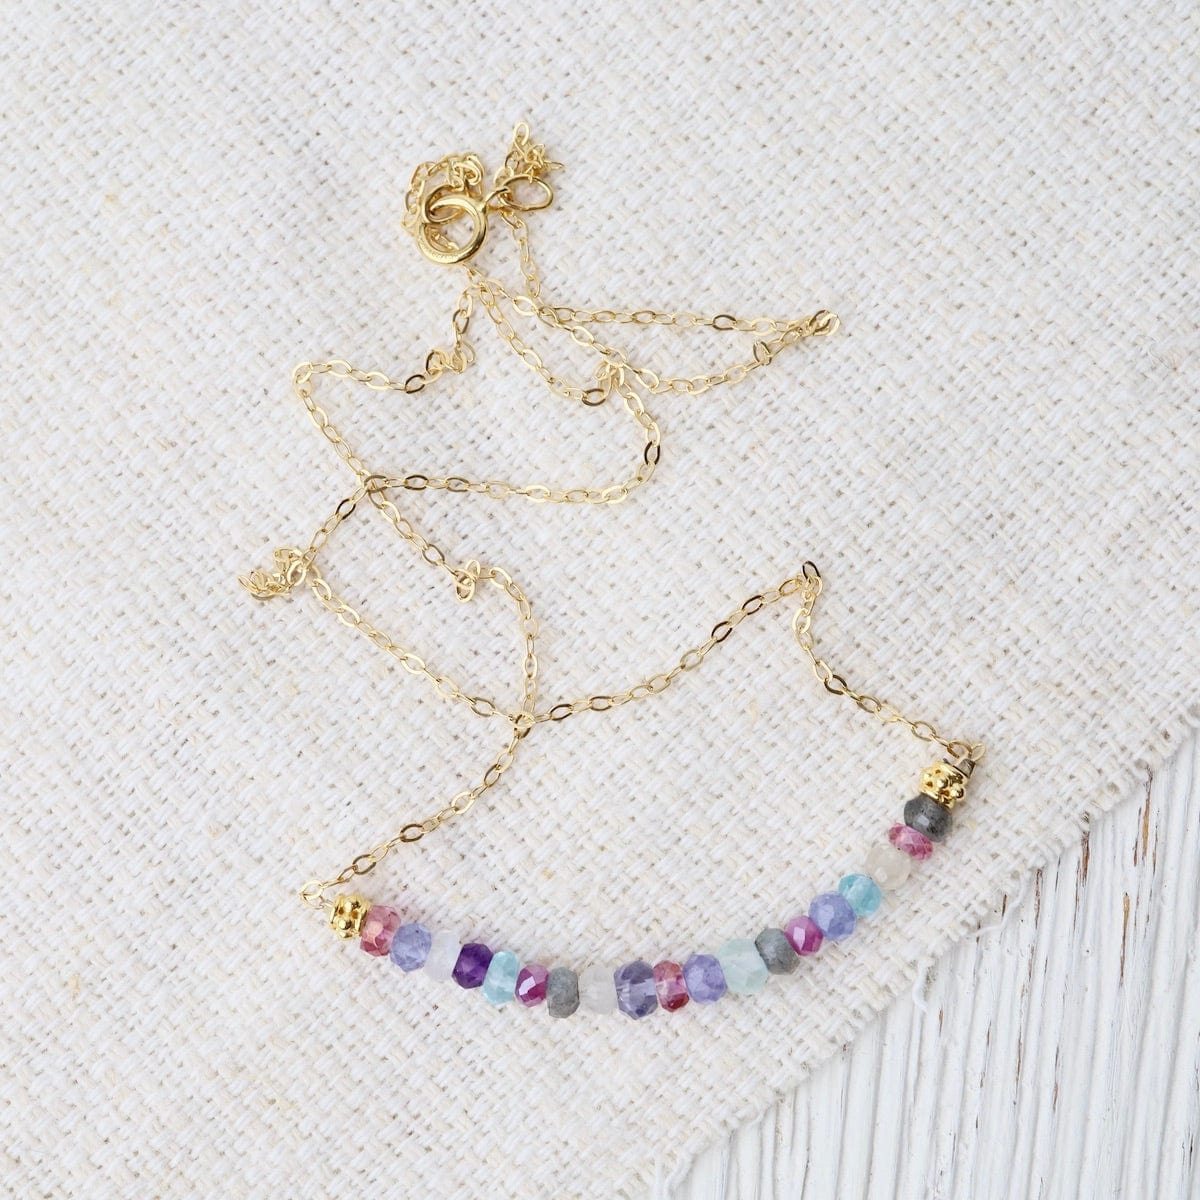 NKL-GF Gold Filled Chain with Gemstone Arc - Multi Color